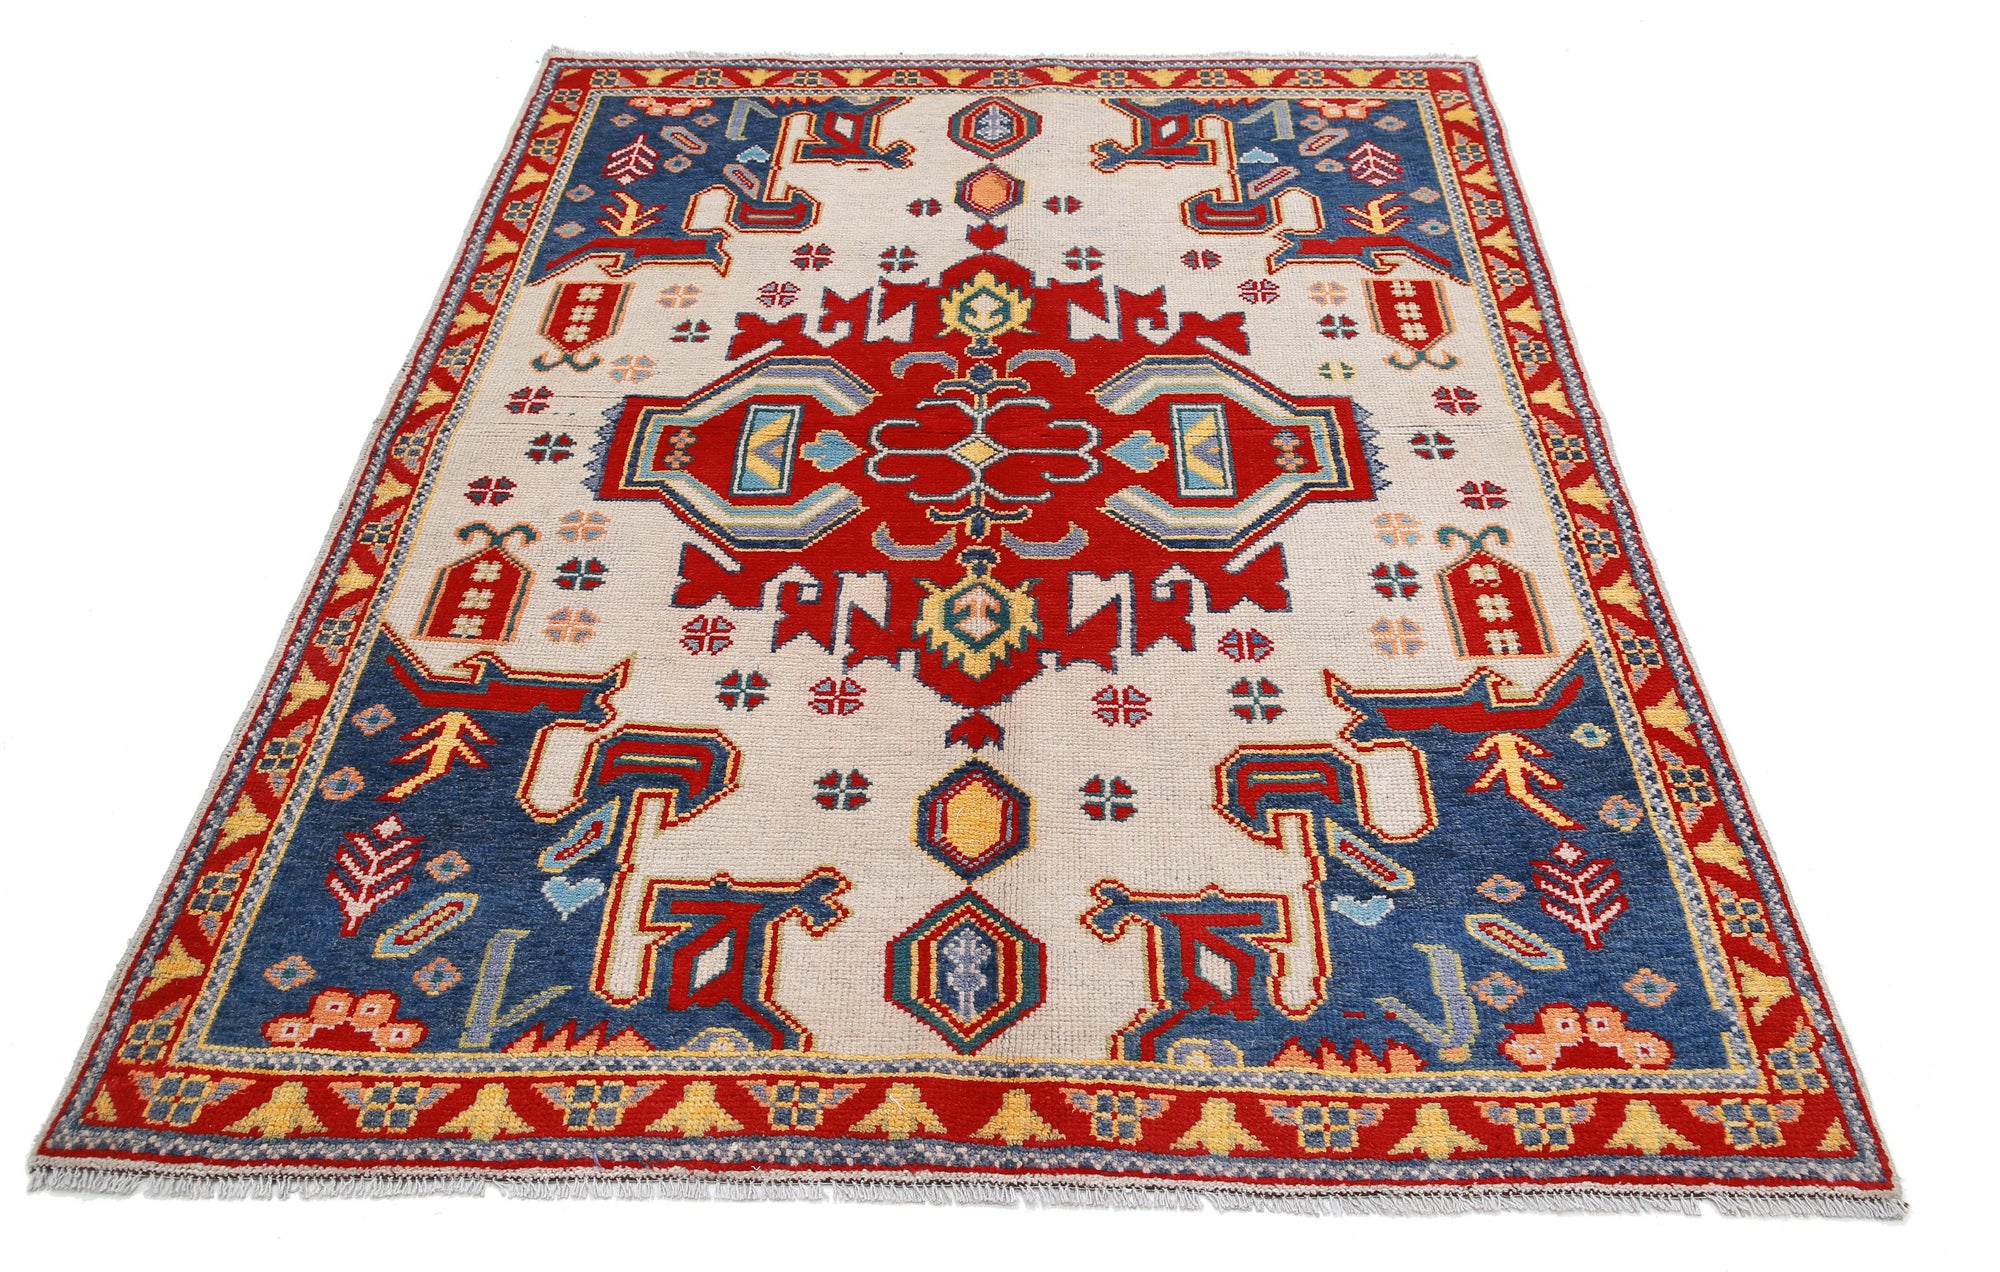 Revival-hand-knotted-qarghani-wool-rug-5014218-3.jpg